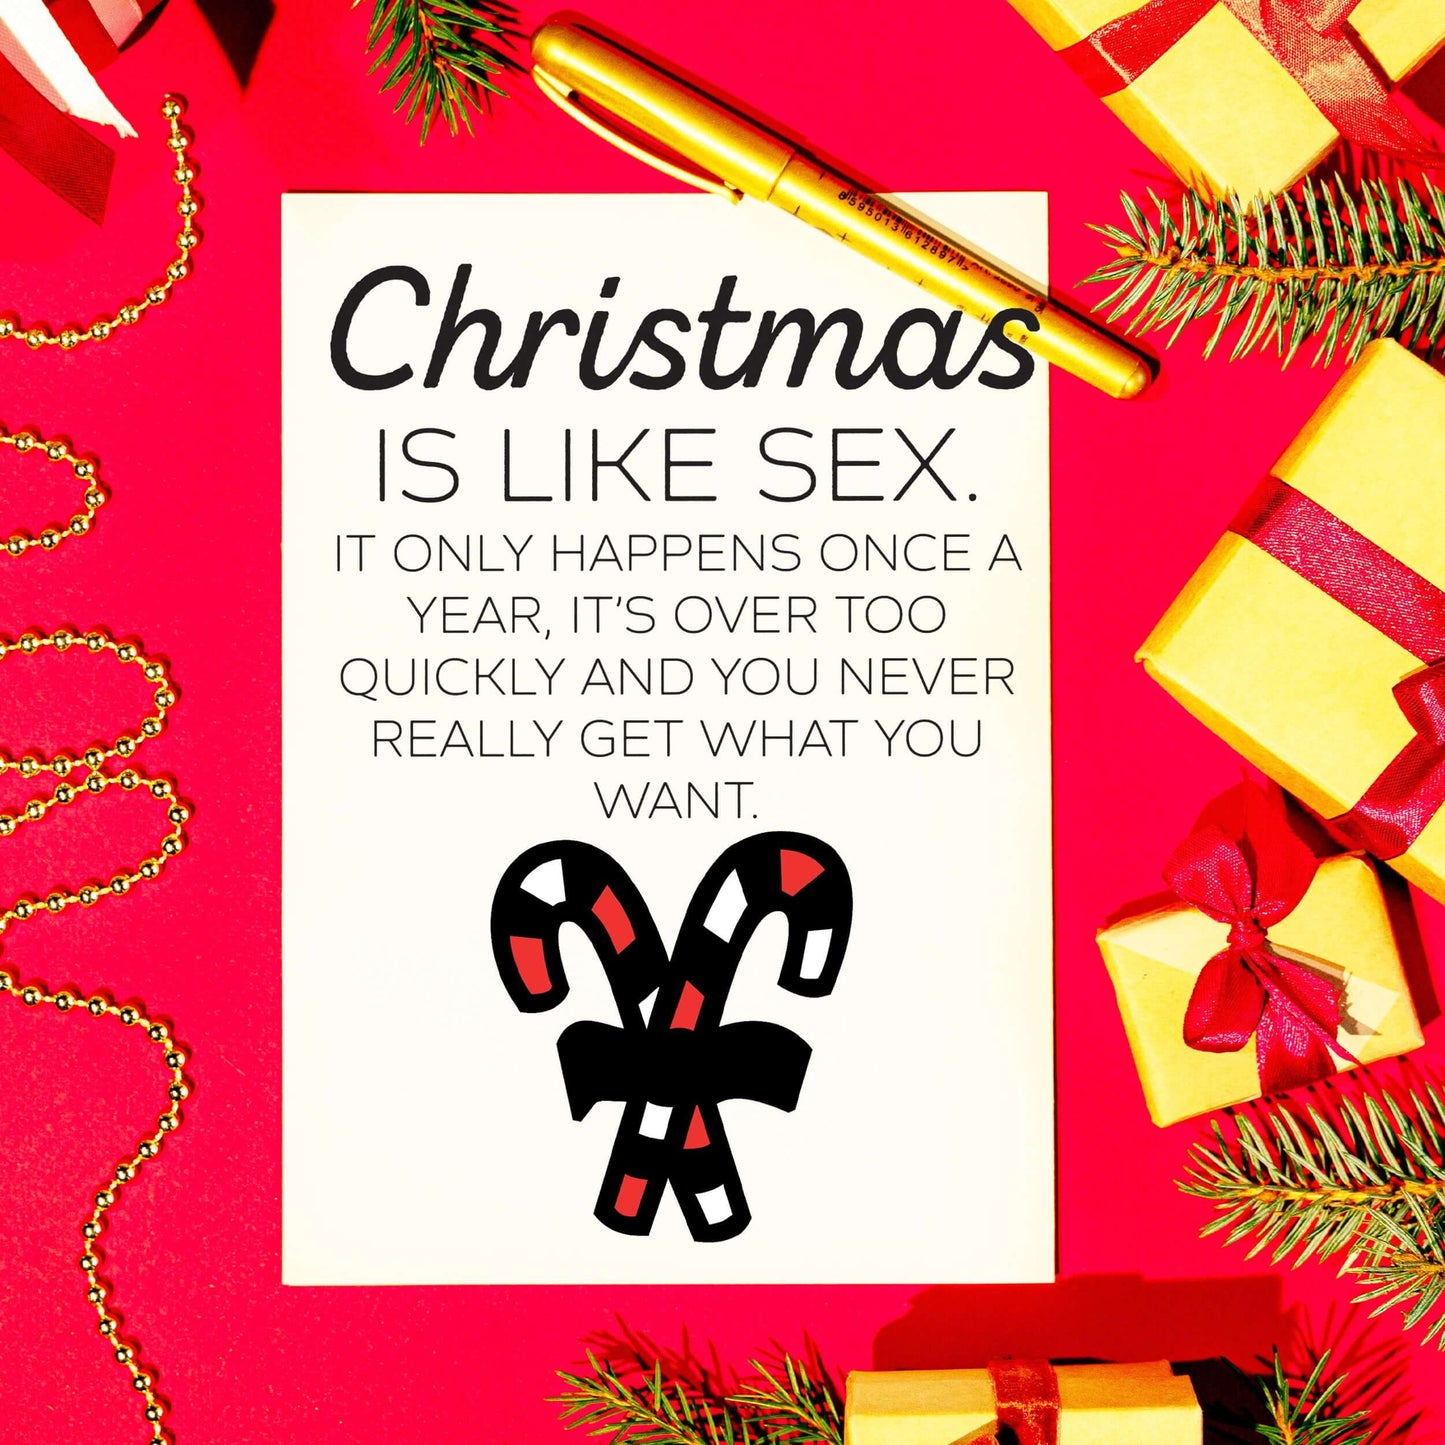 Little Kraken's Christmas is Like Sex Funny Candycane Christmas White A5 Greeting Card, Christmas Cards for £3.50 each